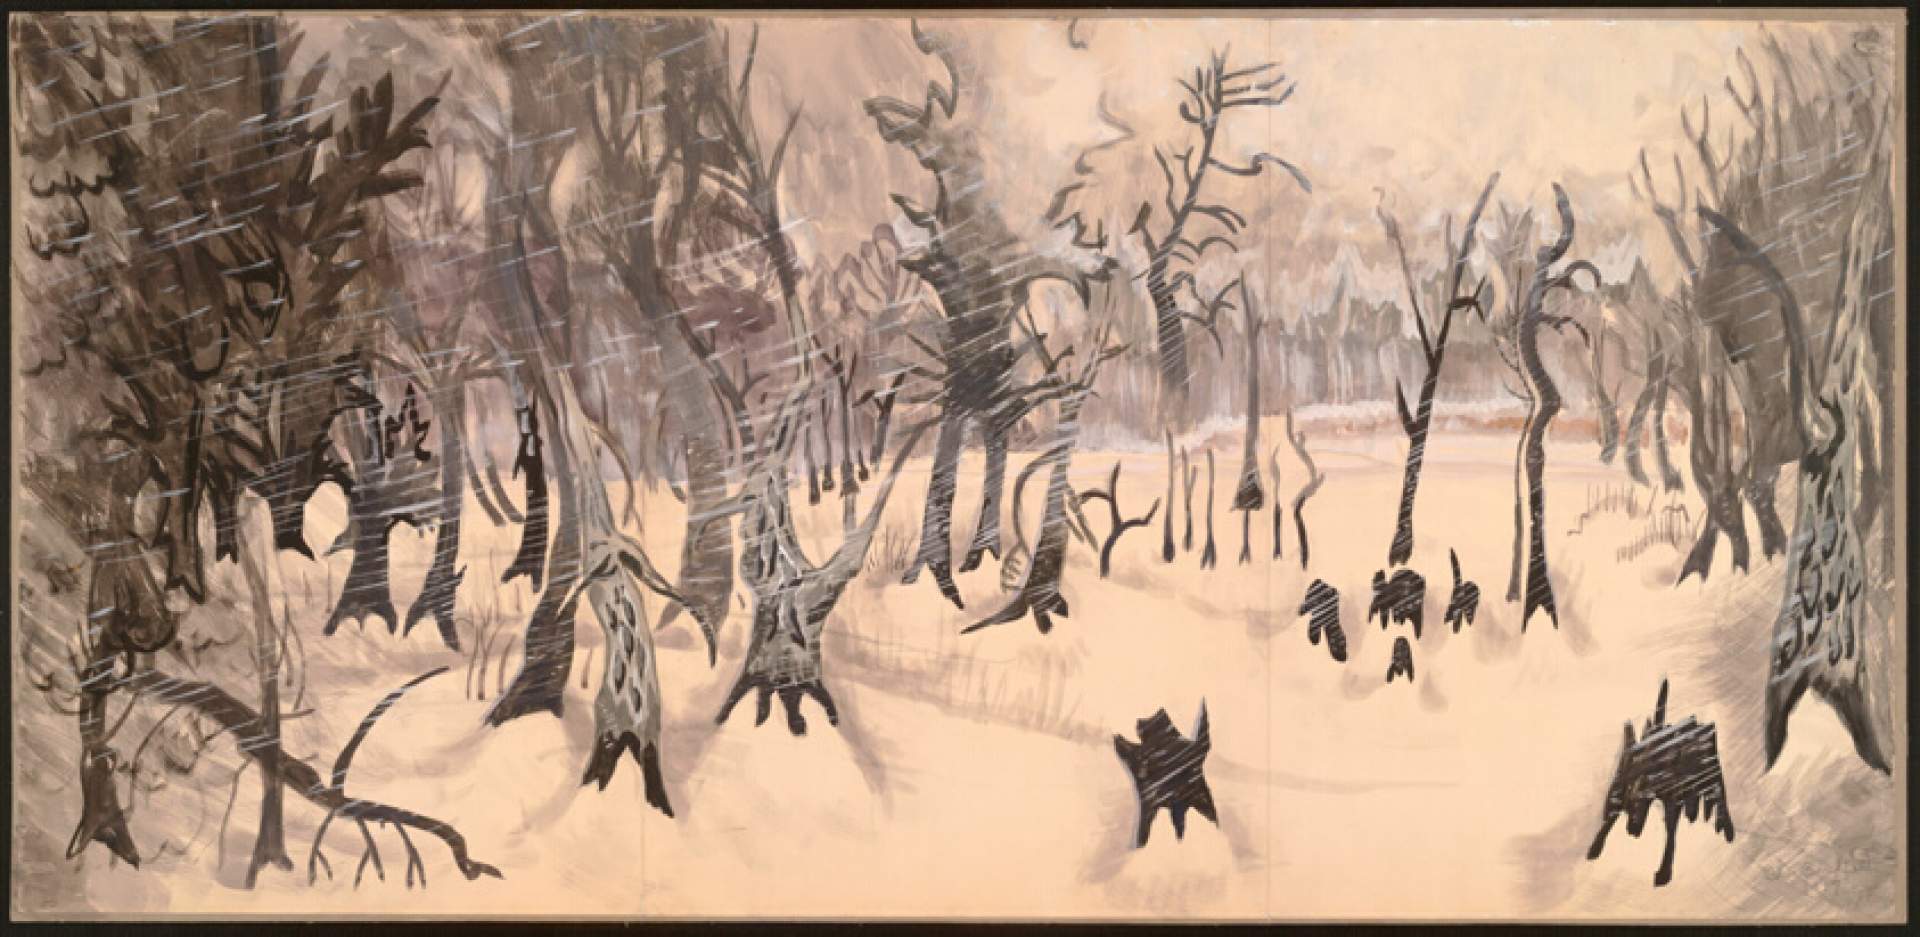 Snow Storm in the Woods